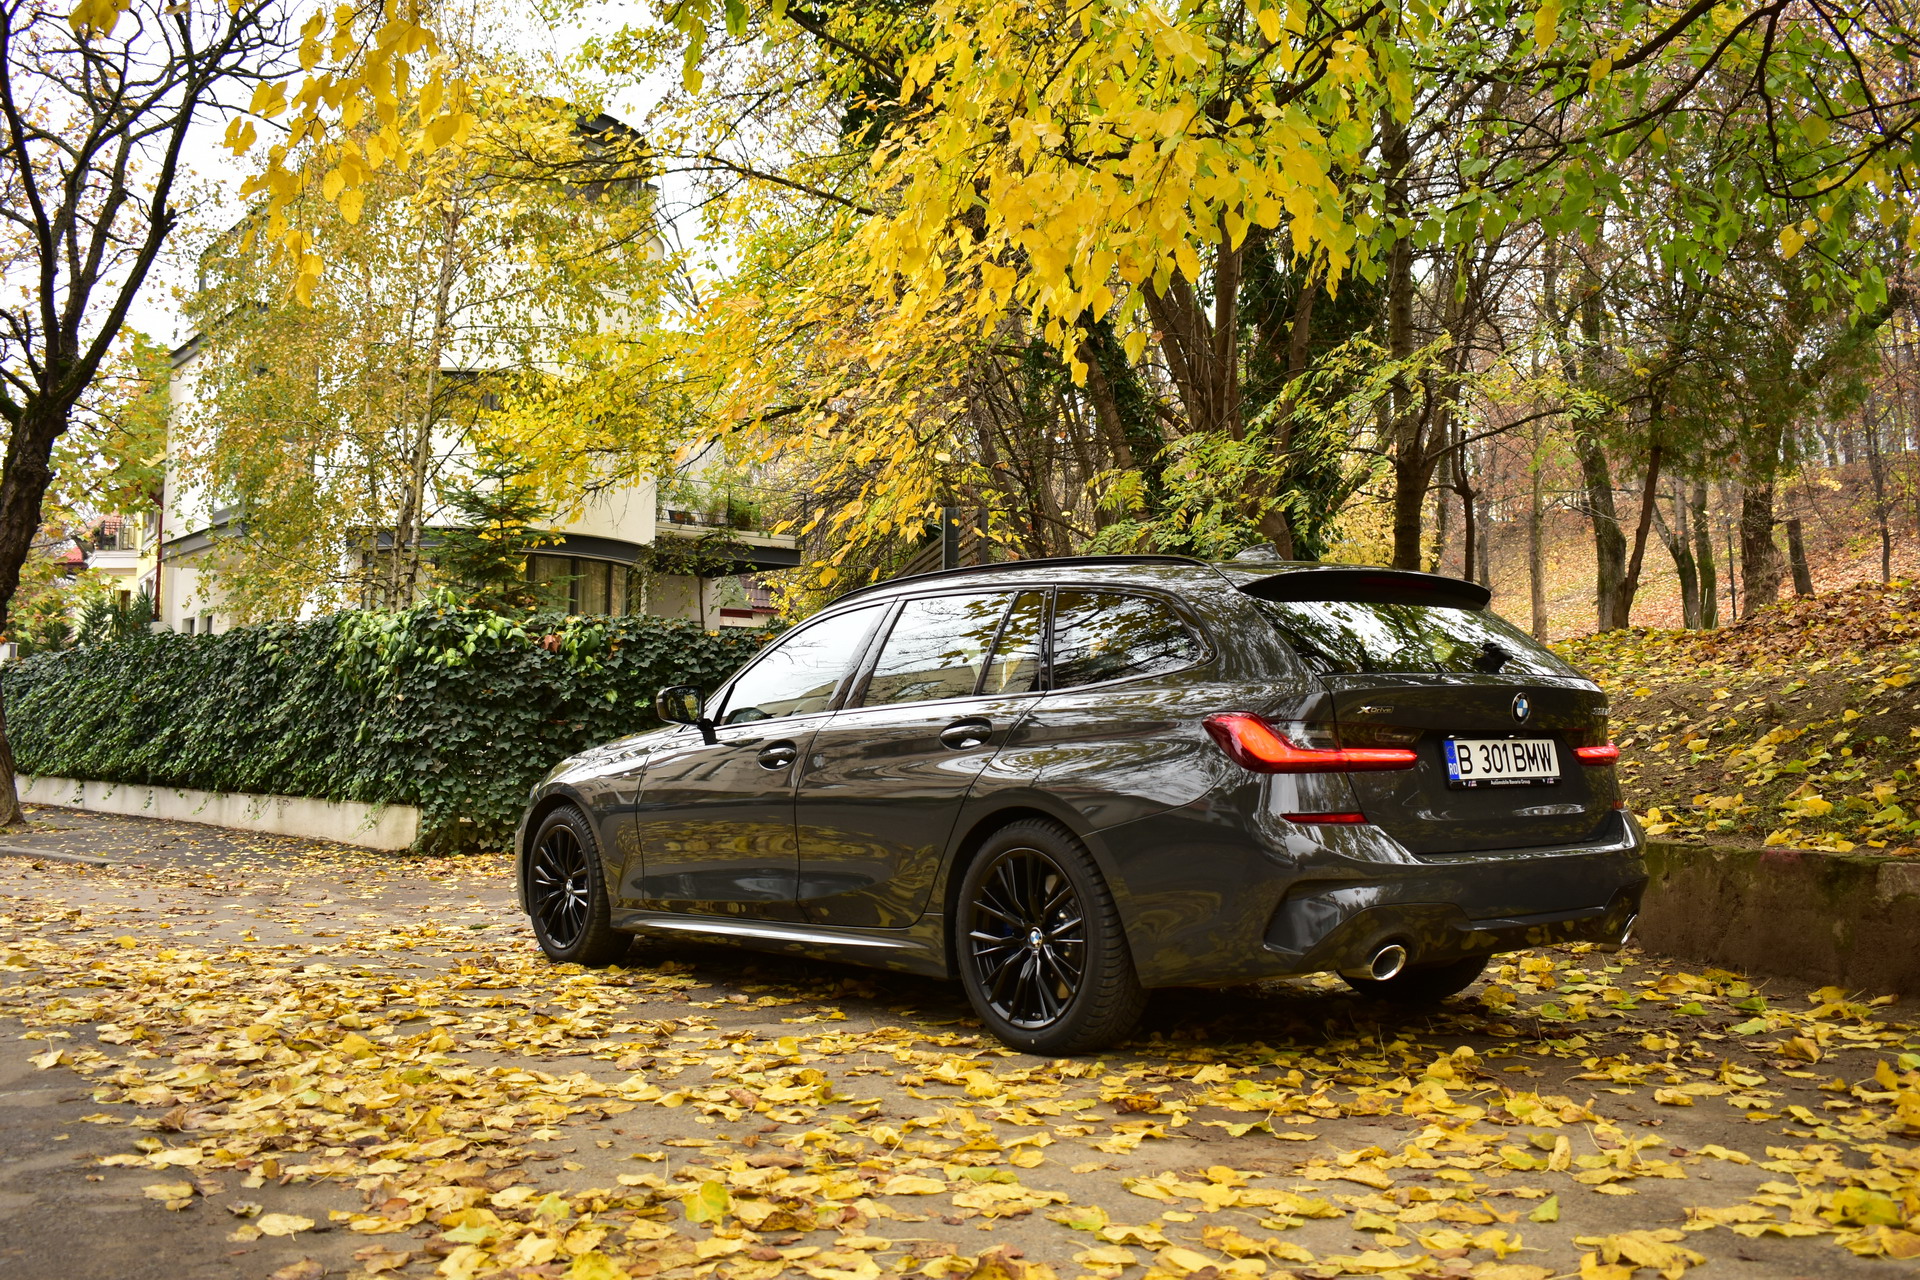 TEST DRIVE: BMW 3 Series Touring (G21) - The perfect everyday companion